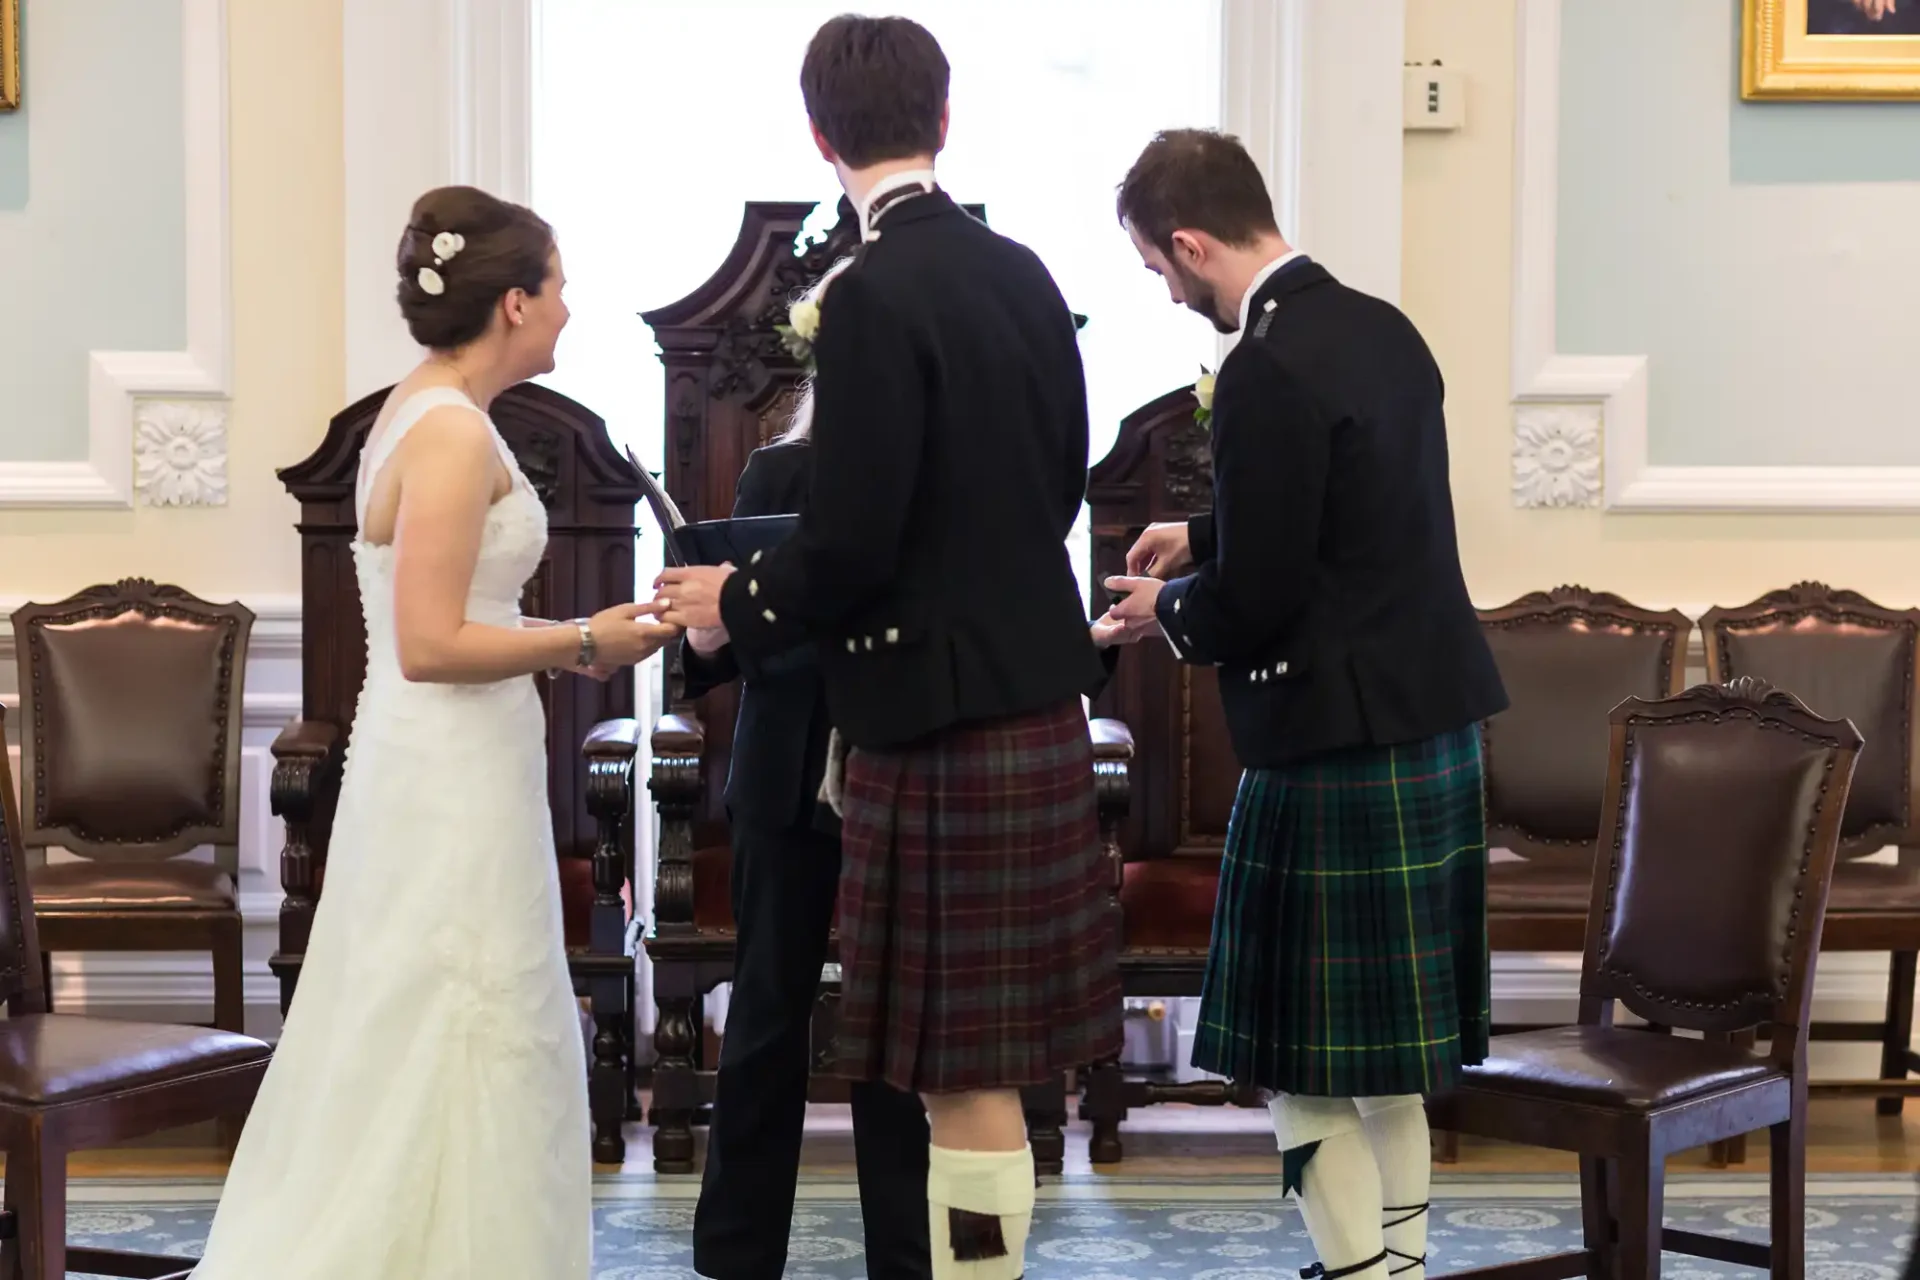 A bride and two men in kilts during a wedding ceremony inside an elegant room, facing away from the camera.